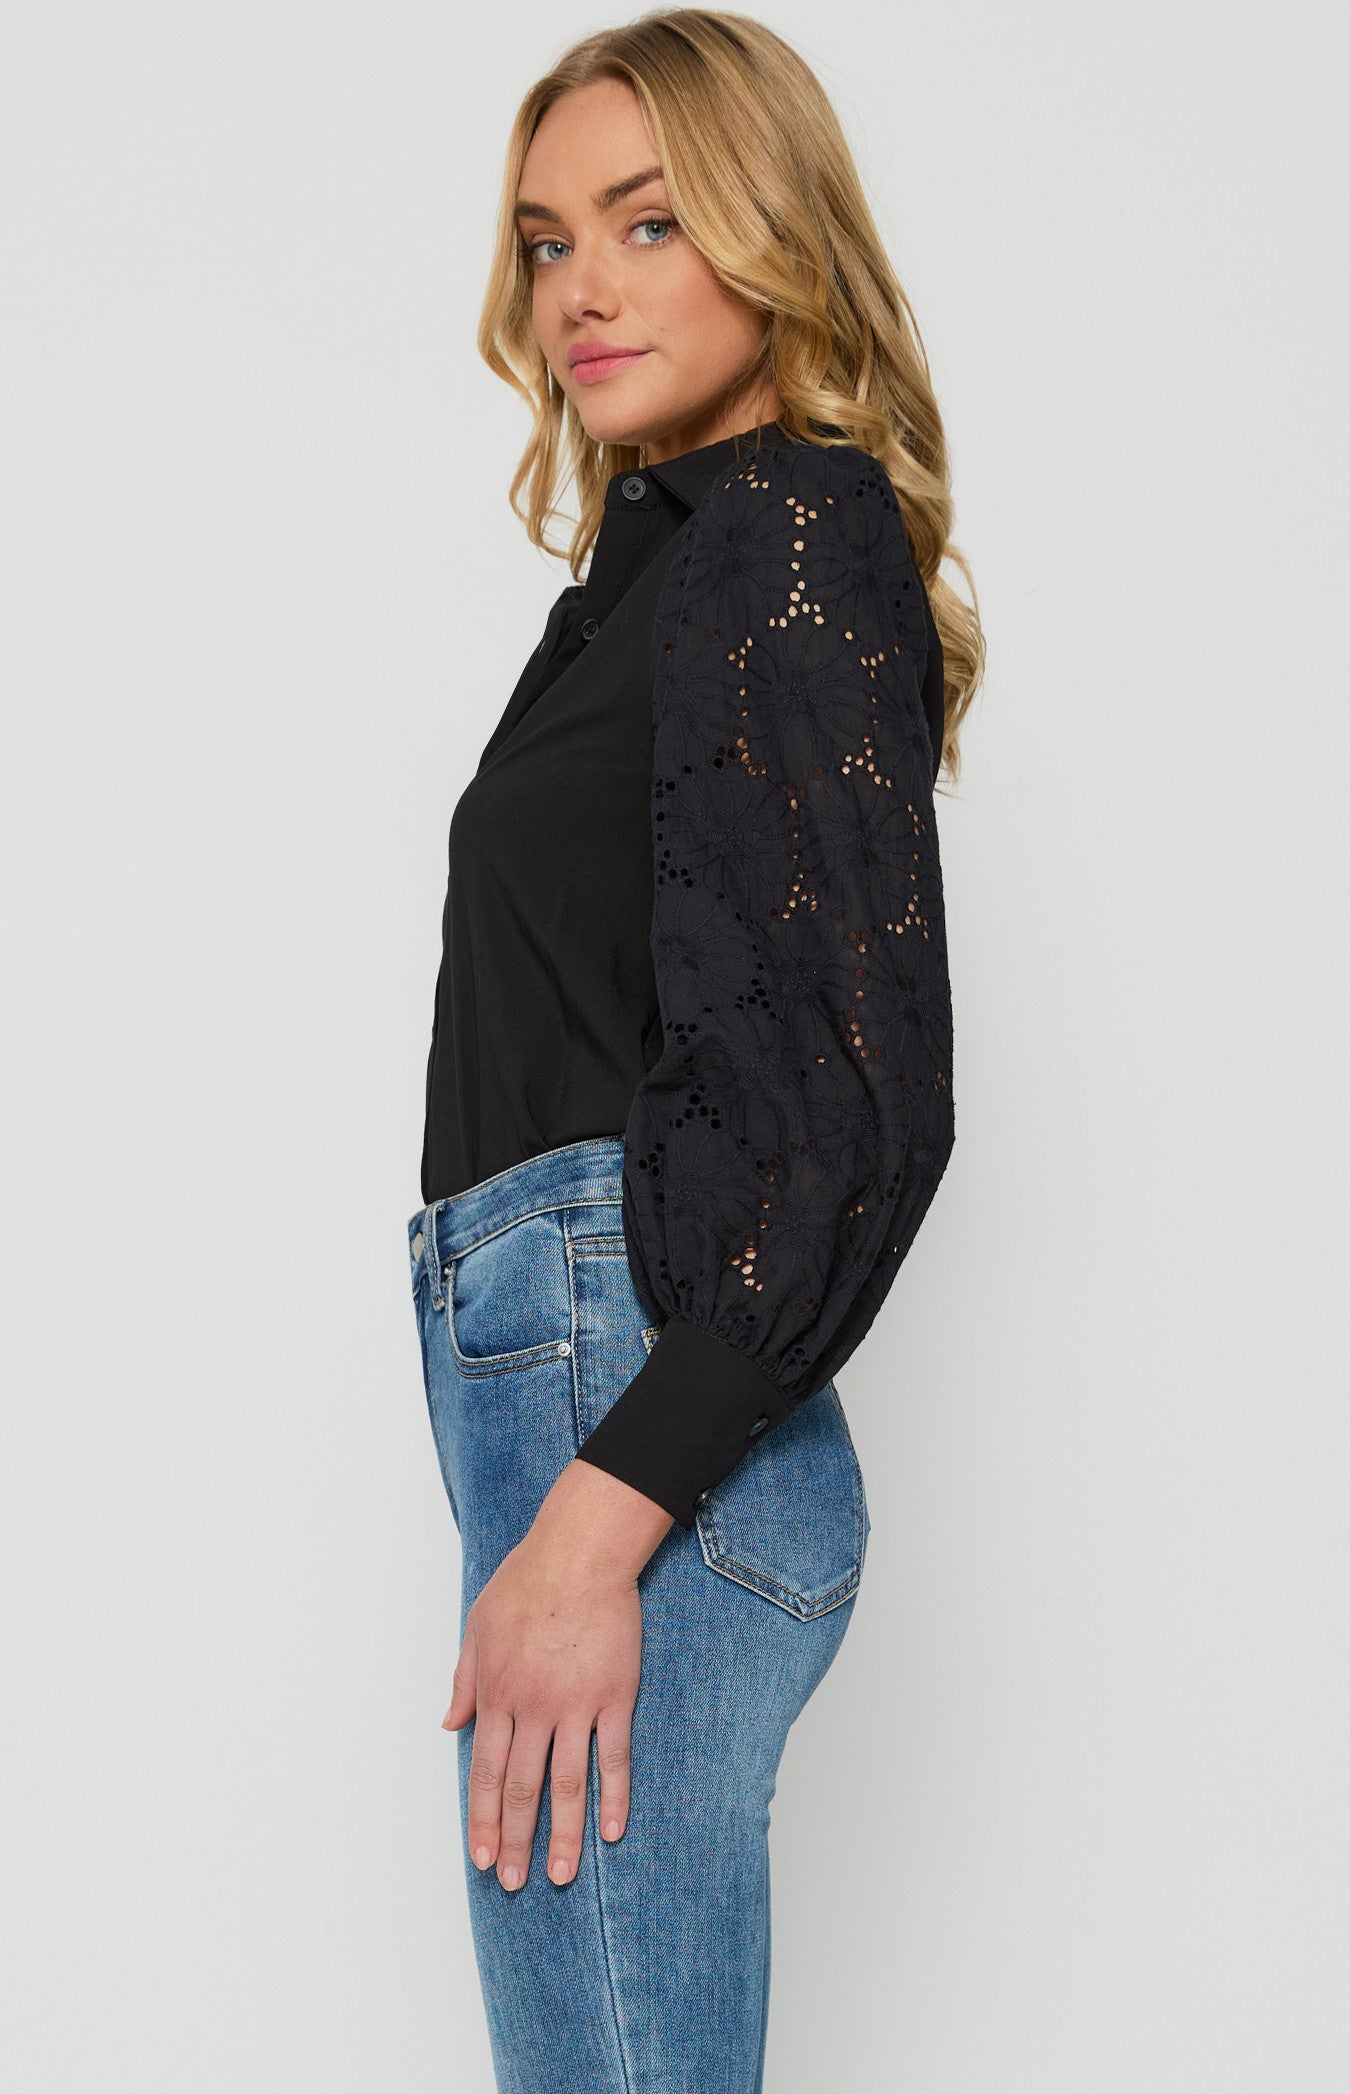 Contrast Cotton Embroidery Sleeves Button up Shirt